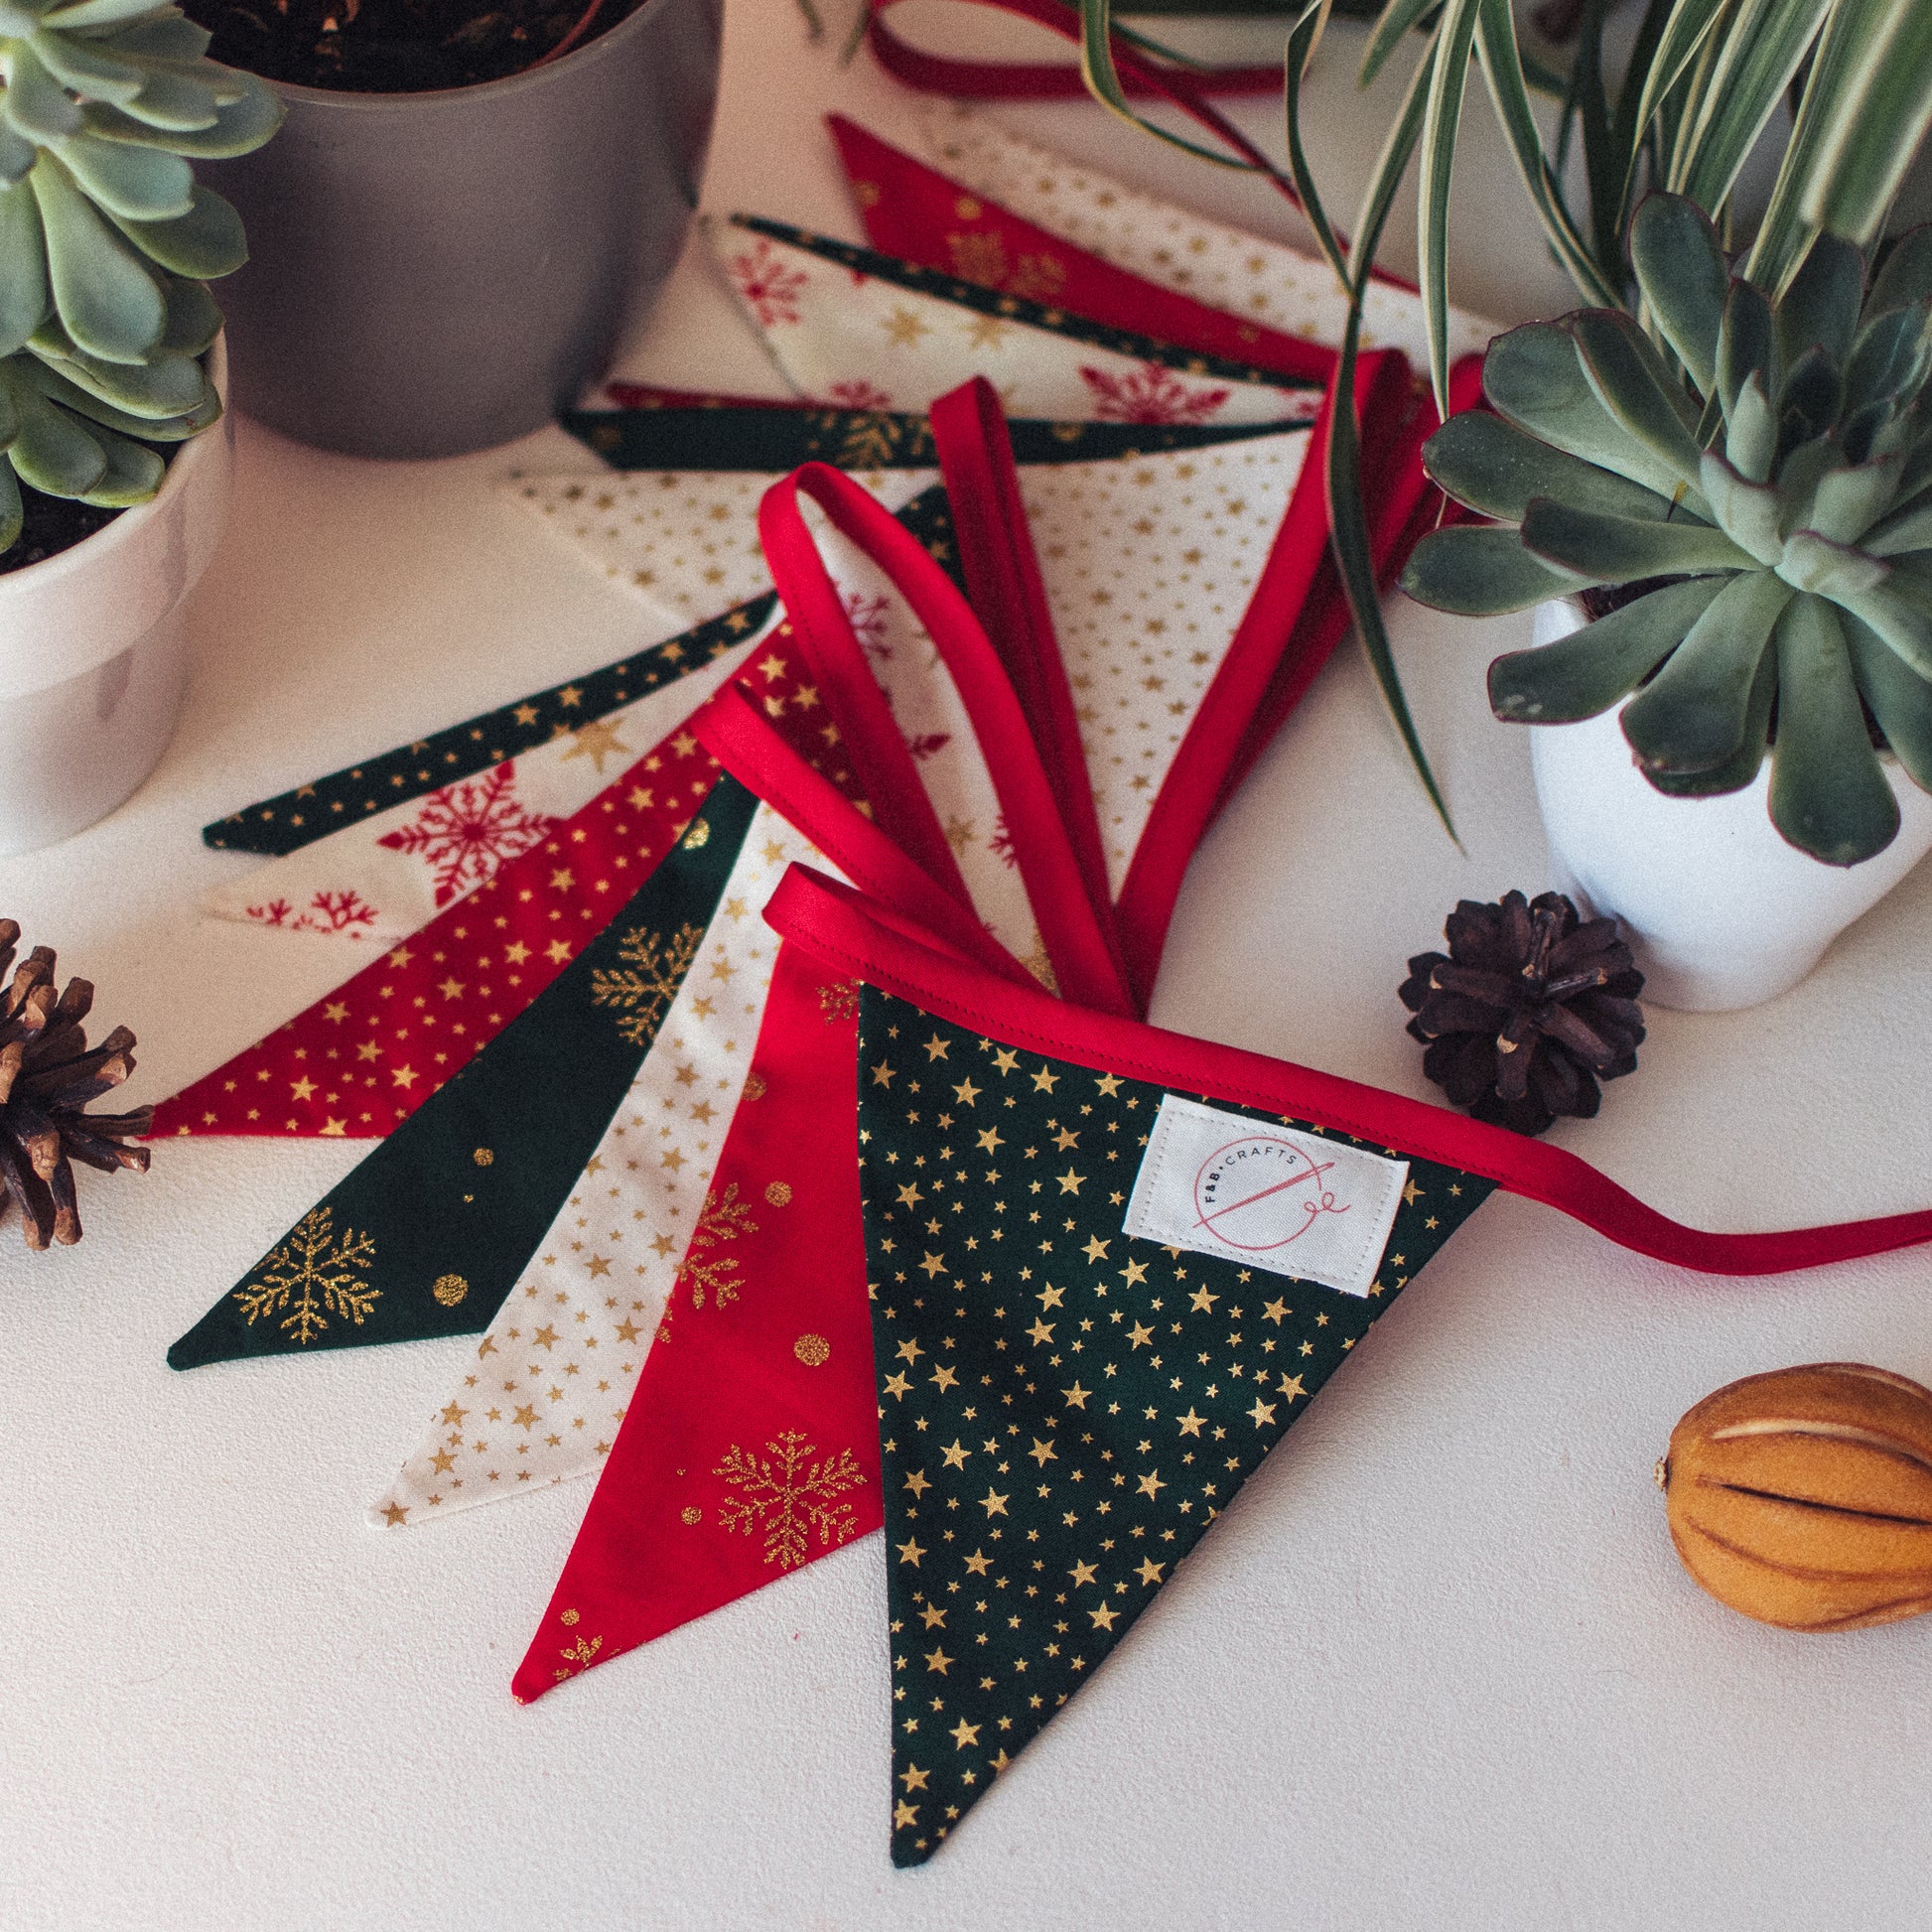 F&B Crafts Festive Christmas Bunting with Stars and Snowflakes